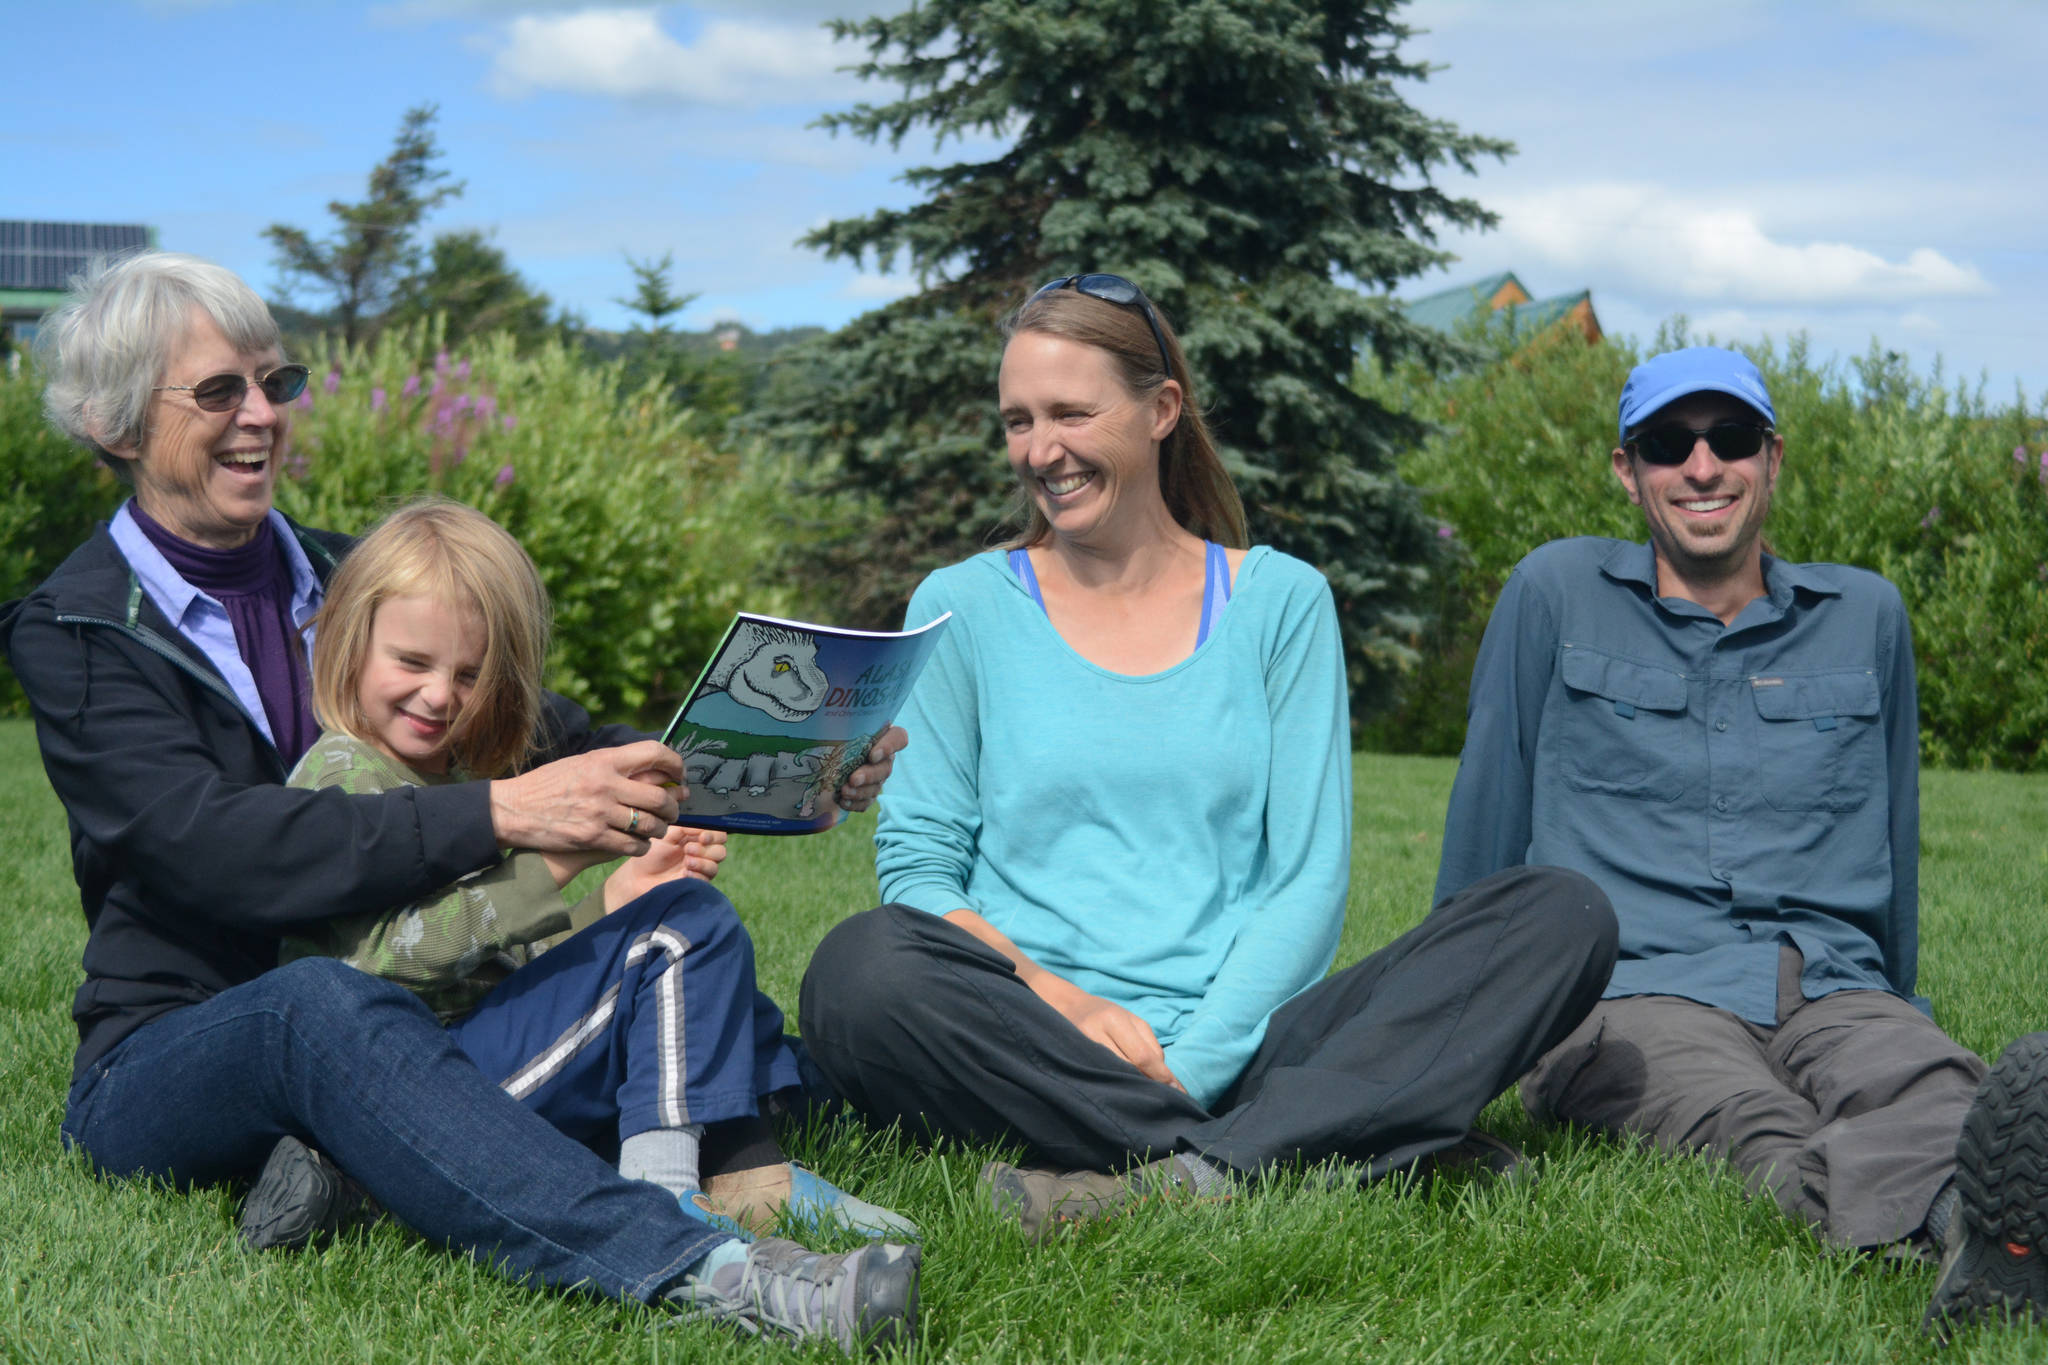 Janet Klein, left, holds her grandson, Sylas Reising, 4, while she visits with her daughter, Deborah Klein, center, and son-in-law George Reising, right, at Bishop’s Beach, Homer, Alaska, on Aug. 9, 2018. Not shown is Kai Reising, 6. Silas and Kai were the inspiration for the Klein’s “color and learn” book, “Alaska’s Dinosaurs and Other Cretaceous Creatures.”